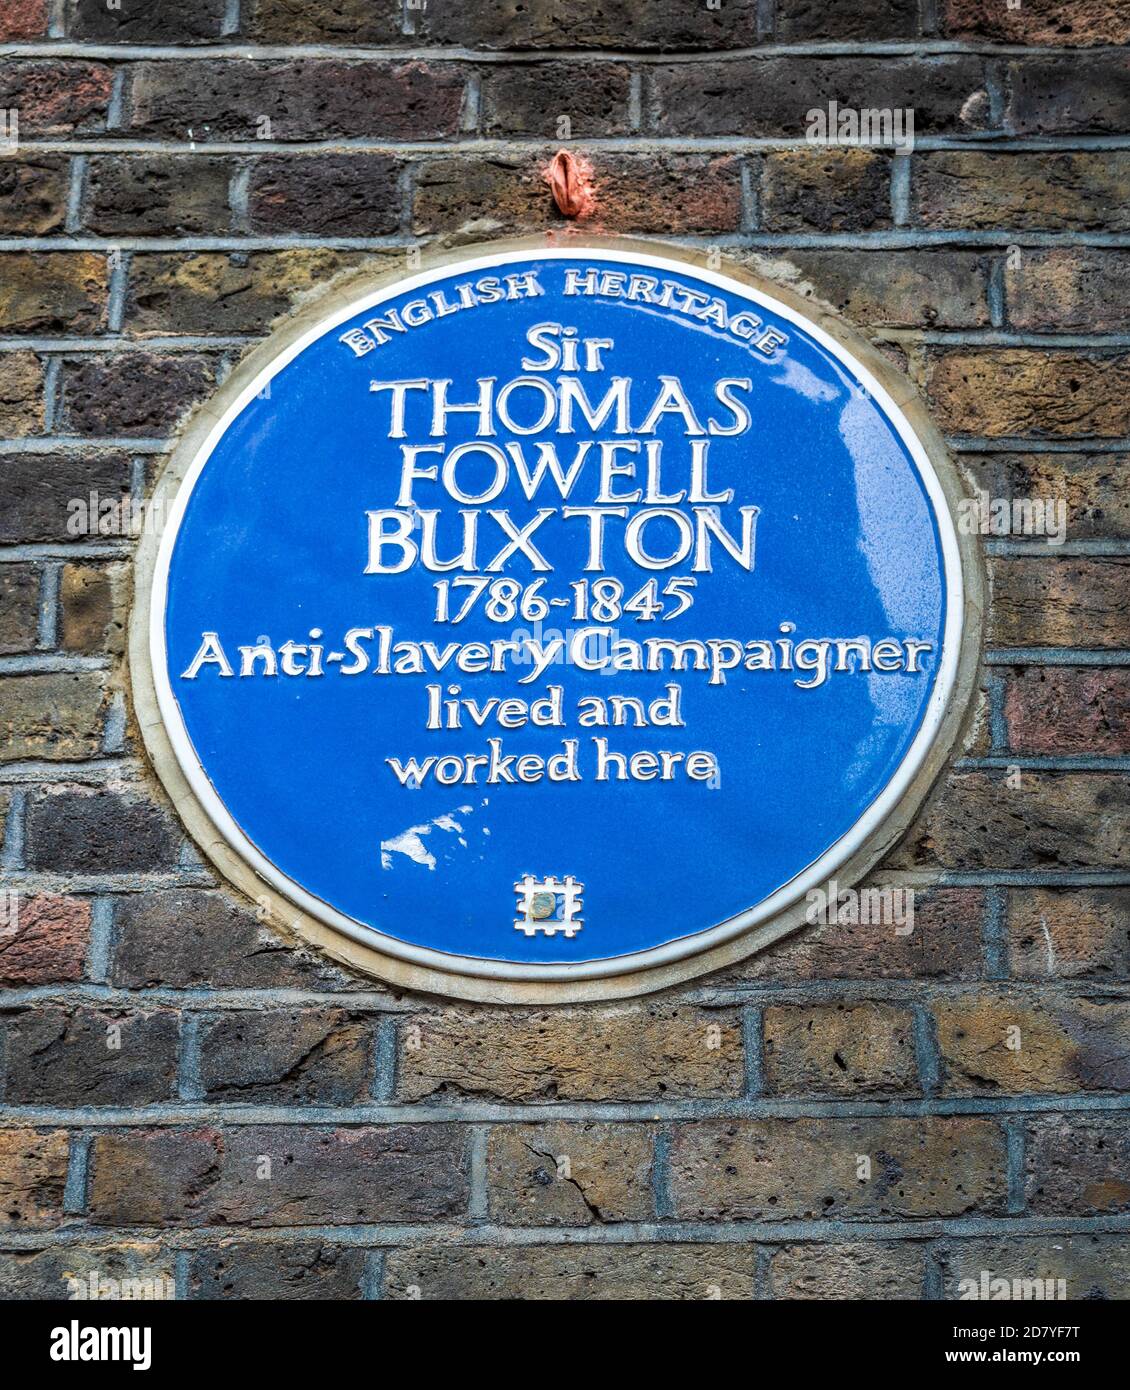 Sir Thomas Fowell Buxton Blue Plaque Brick Lane East London. Sir Thomas Fowell Buxton 1786-1845 Anti-Slavery Campaigner lived and worked here. Stock Photo